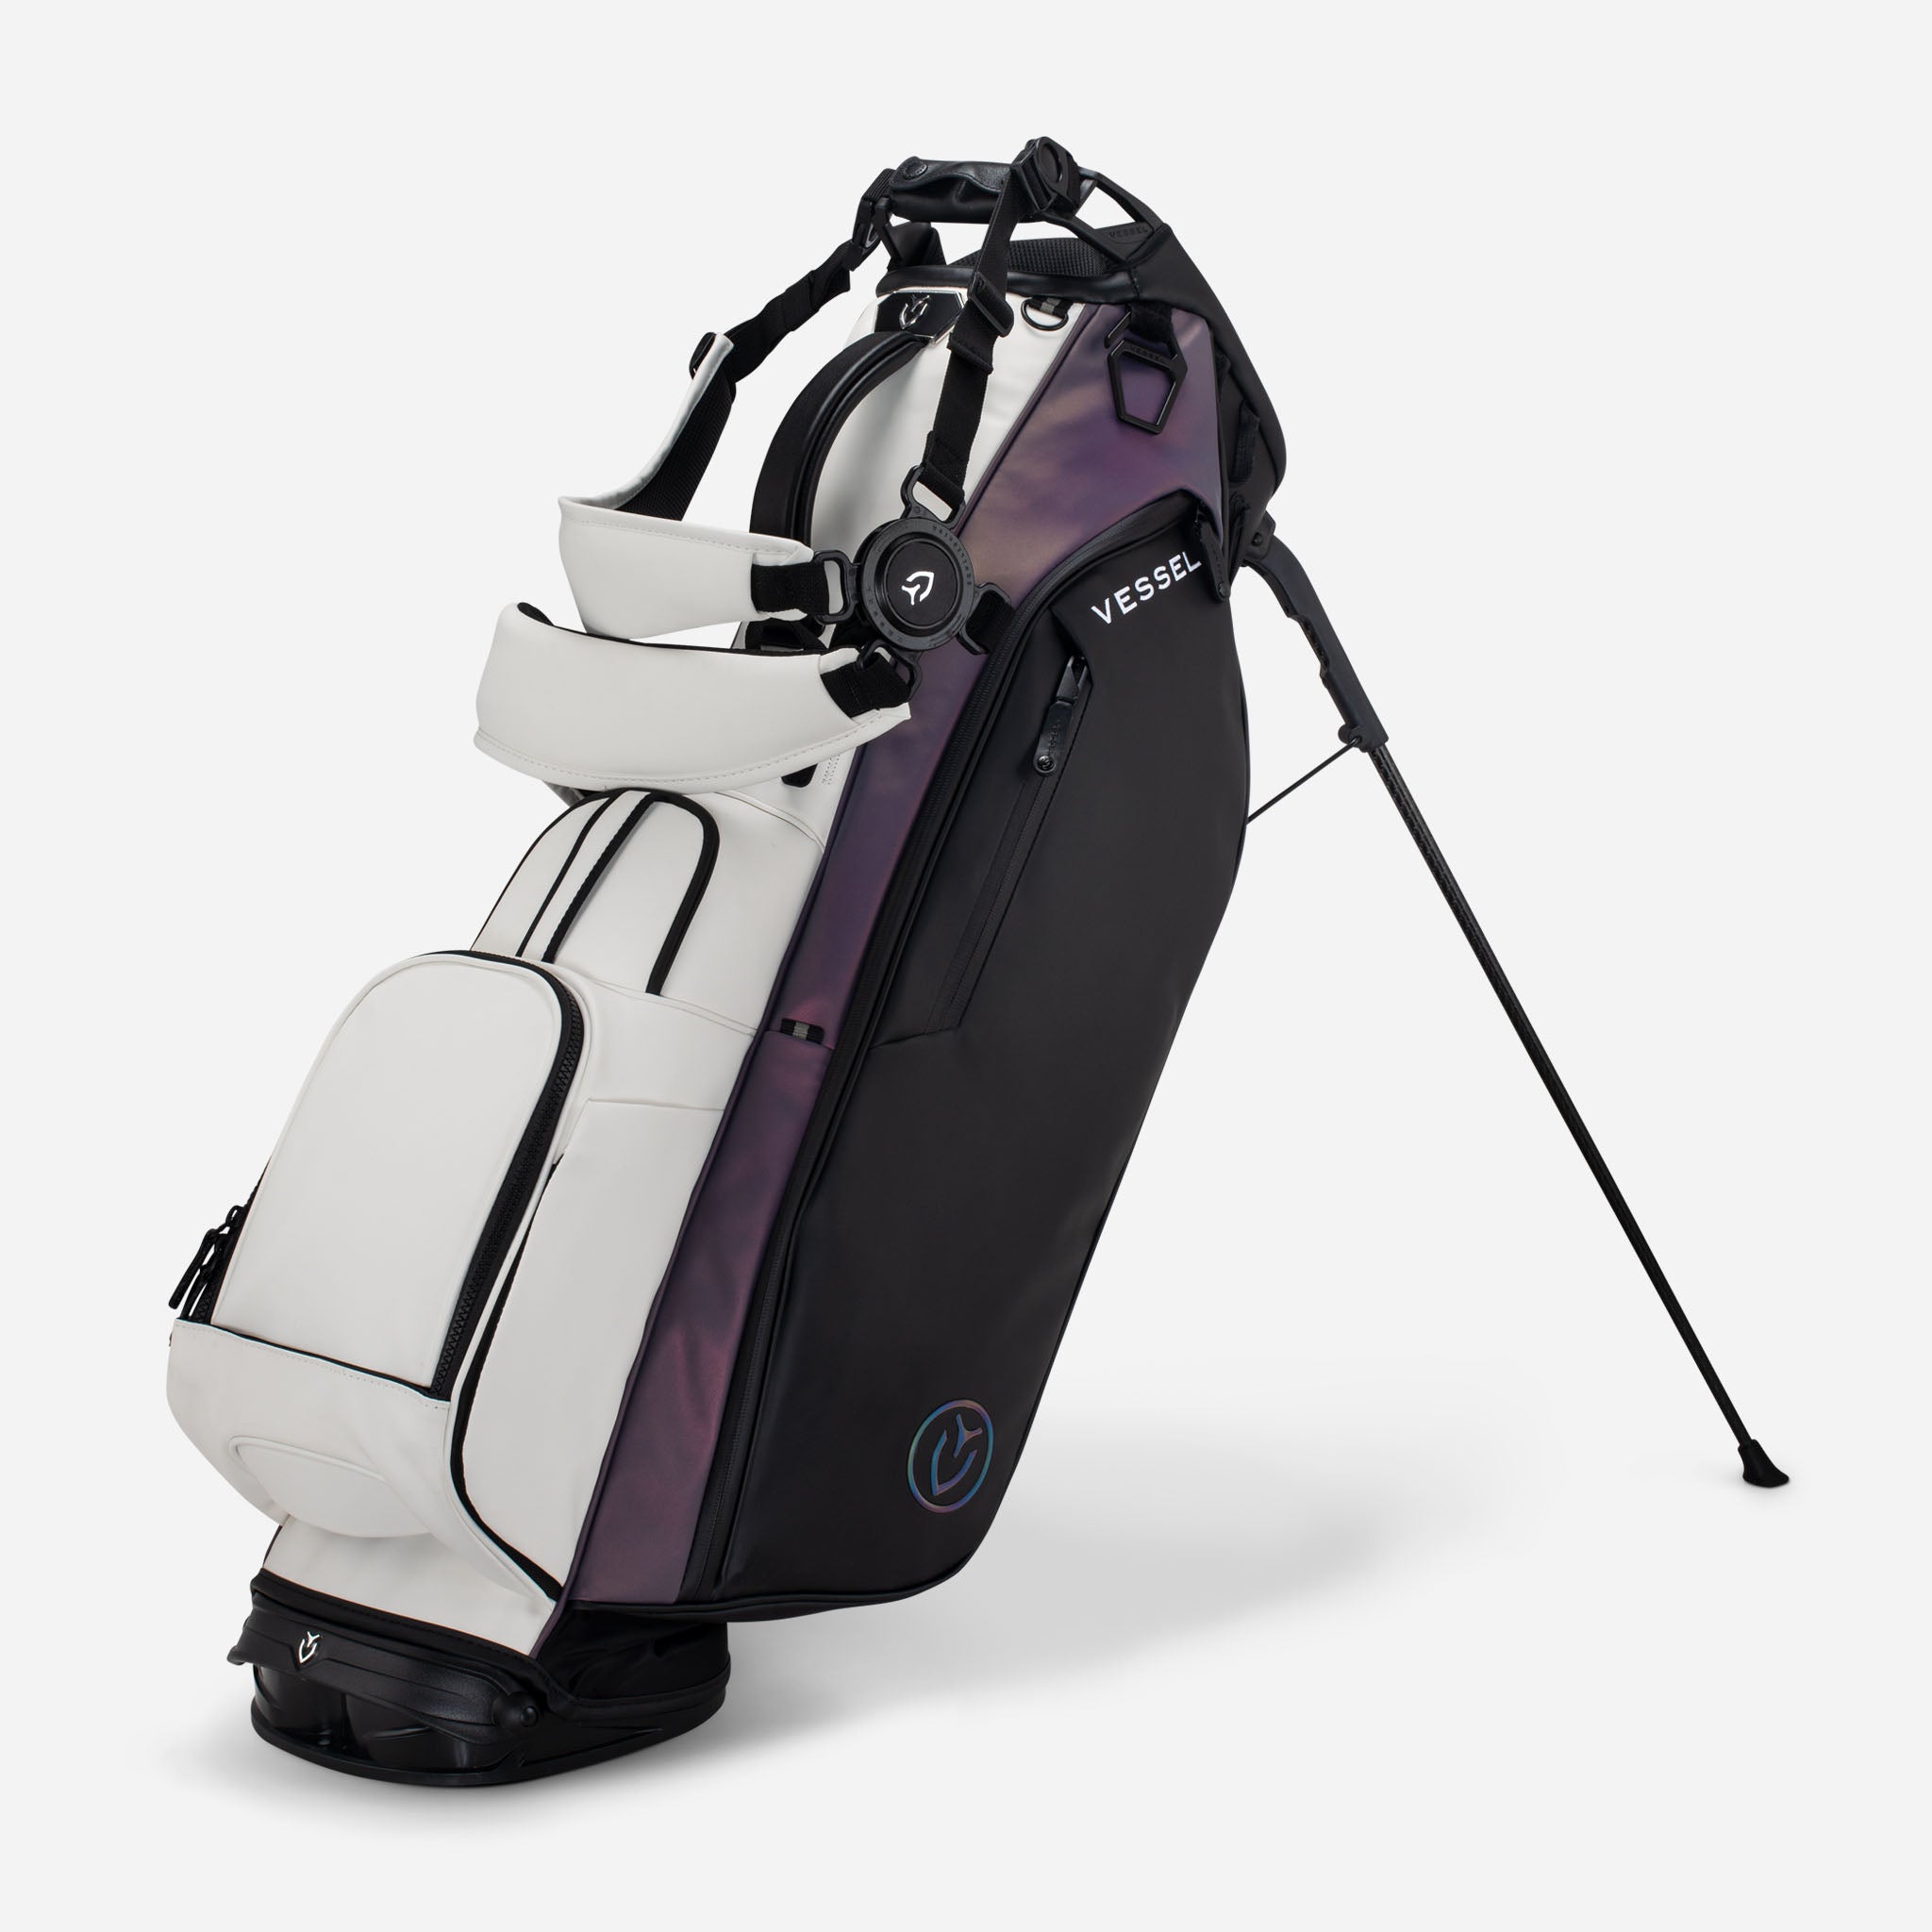 Vessel Golf Player Stand Bag Review, Page 7